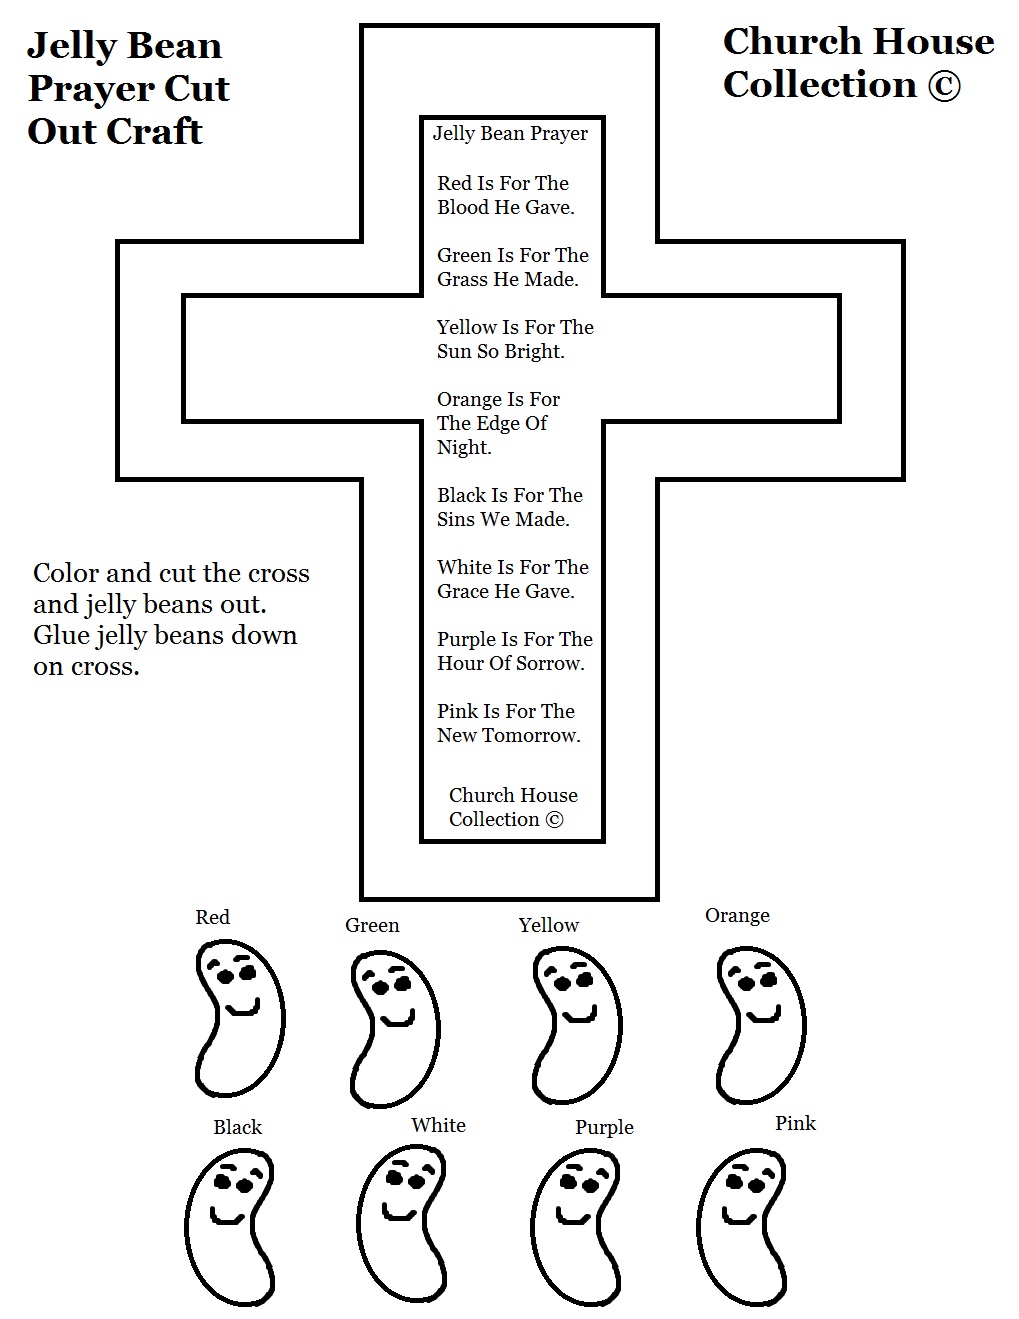 Church House Collection Blog: Jelly Bean Prayer Cross Cut Out Plant